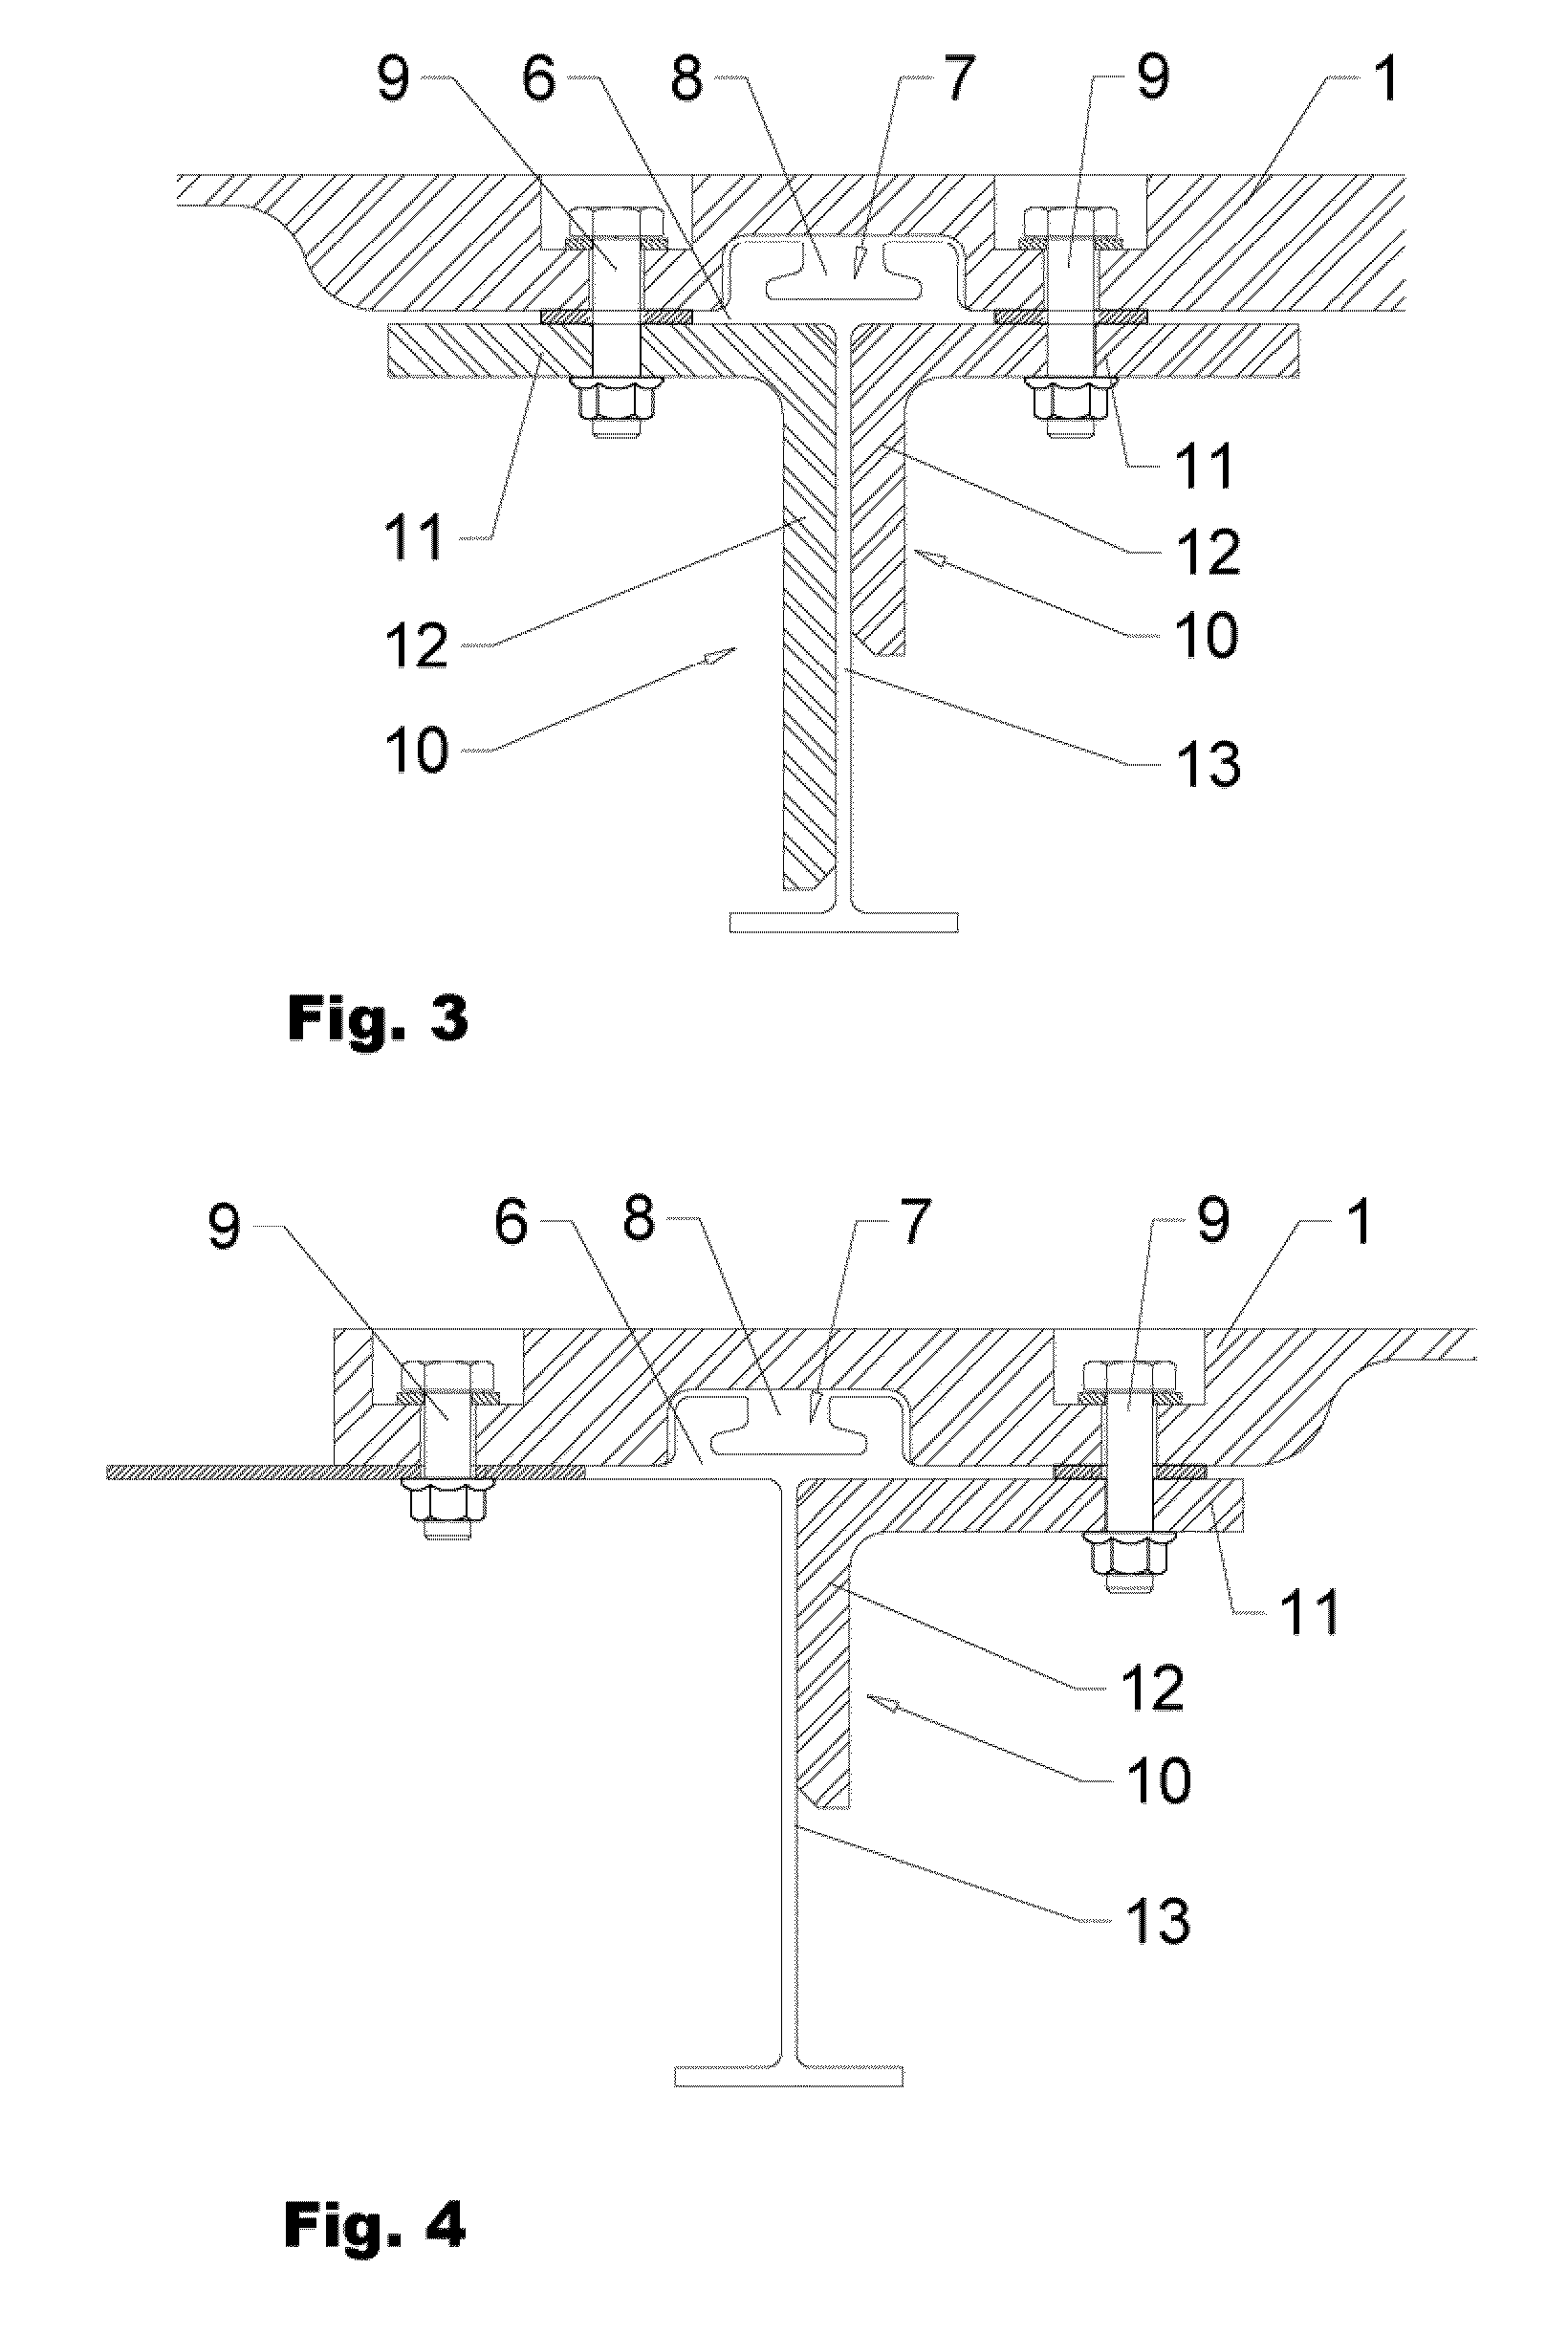 Adapter plate for airplane structure